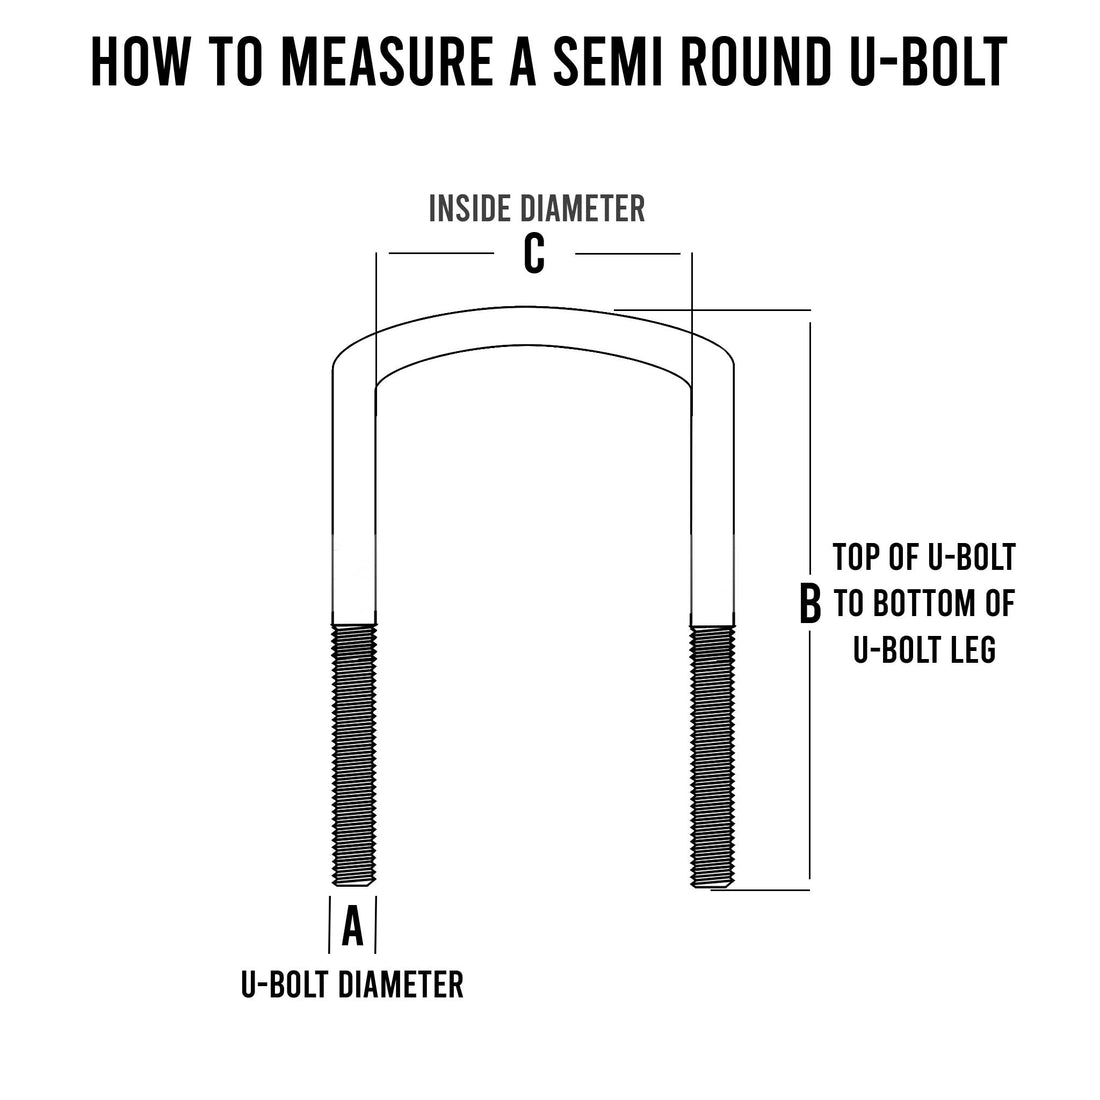 Diagram of how to measure a 3/8 inch semi round U-bolt.